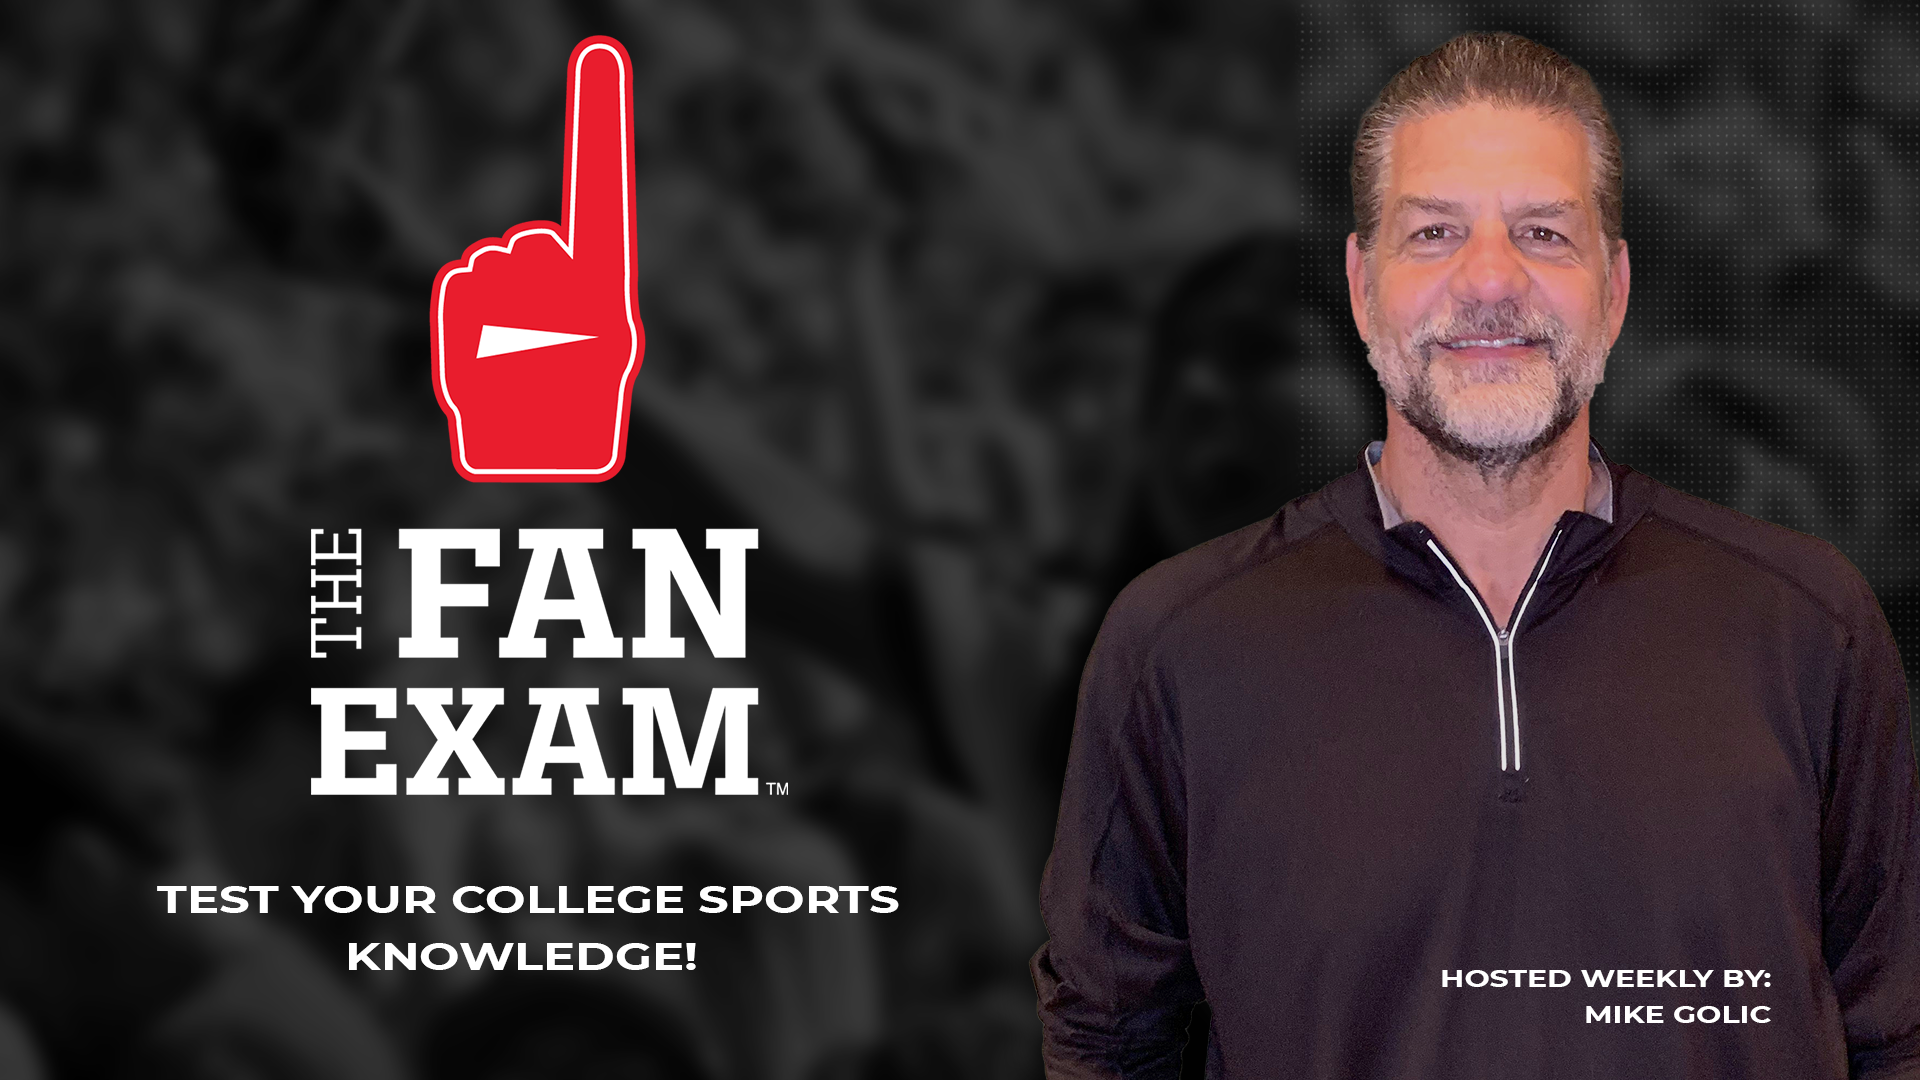 MIKE GOLIC TO HOST THE FAN EXAM PRESENTED BY UNILEVER, COLLEGE SPORTS LIVE TRIVIA GAME STARTING NOV. 10